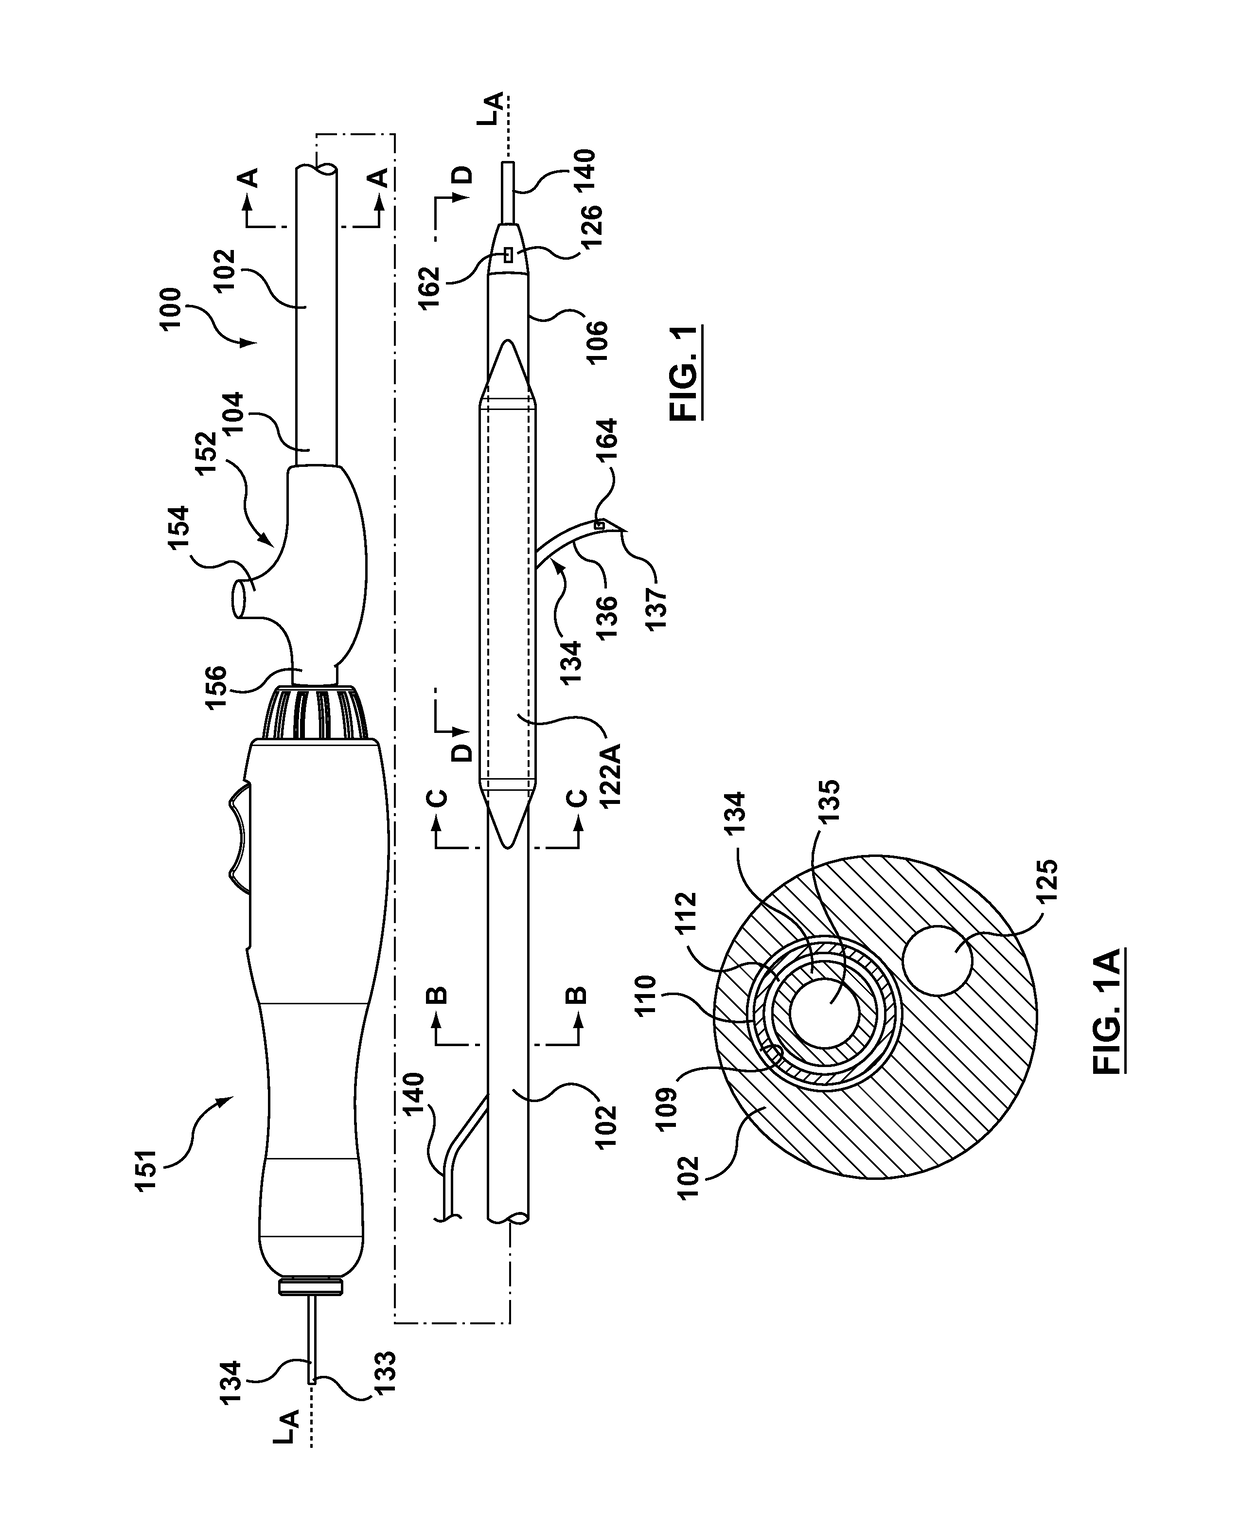 Occlusion bypassing apparatus with a re-entry needle and a stabilization tube